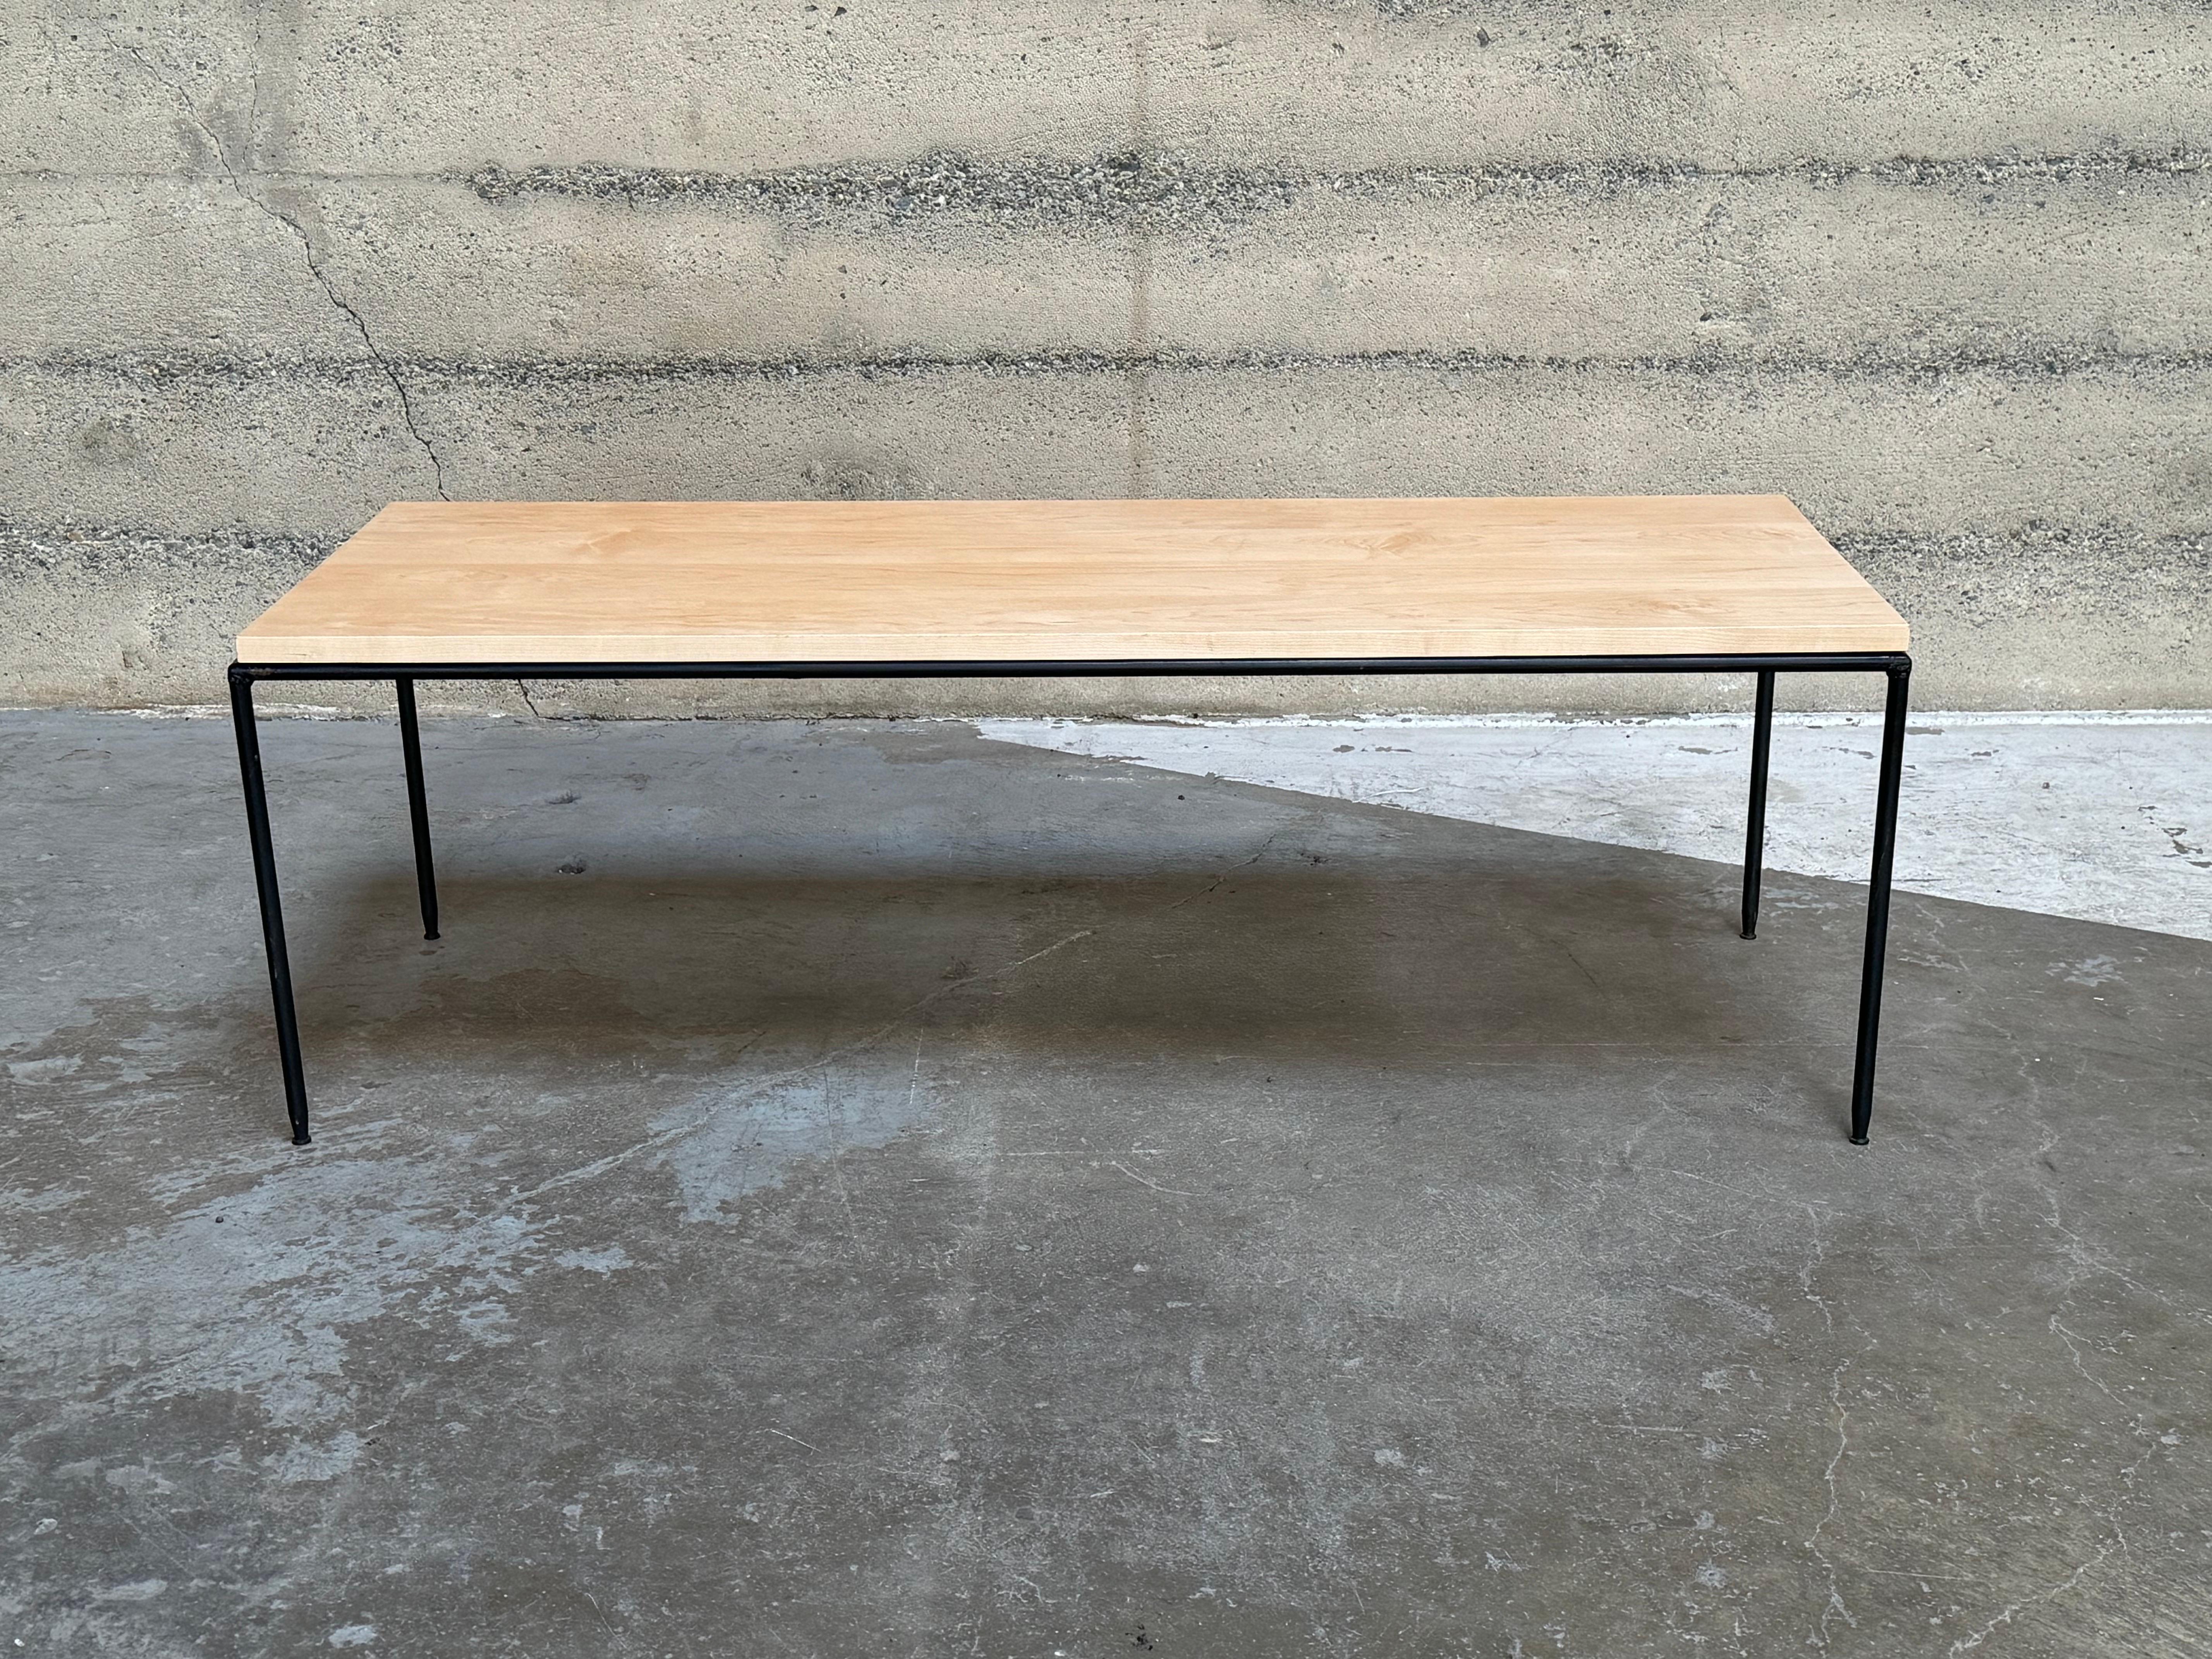 Planner Group coffee table in maple and welded iron with adjustable glides on the bottom of the legs. Designed by Paul McCobb who over the course of his career was bestowed the Good Design Award by the MoMA NY for his creations.